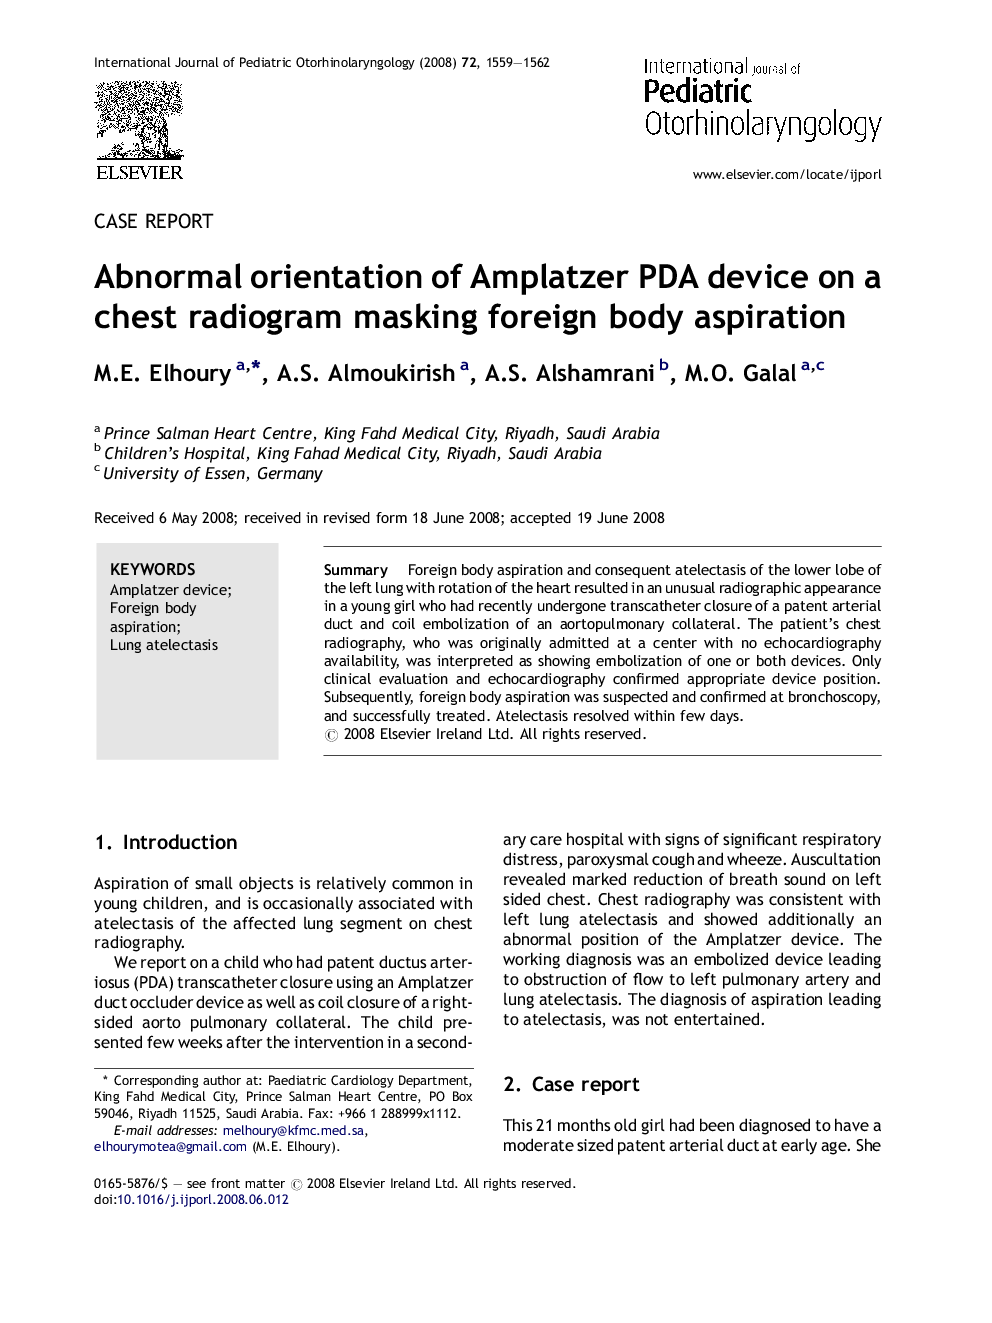 Abnormal orientation of Amplatzer PDA device on a chest radiogram masking foreign body aspiration